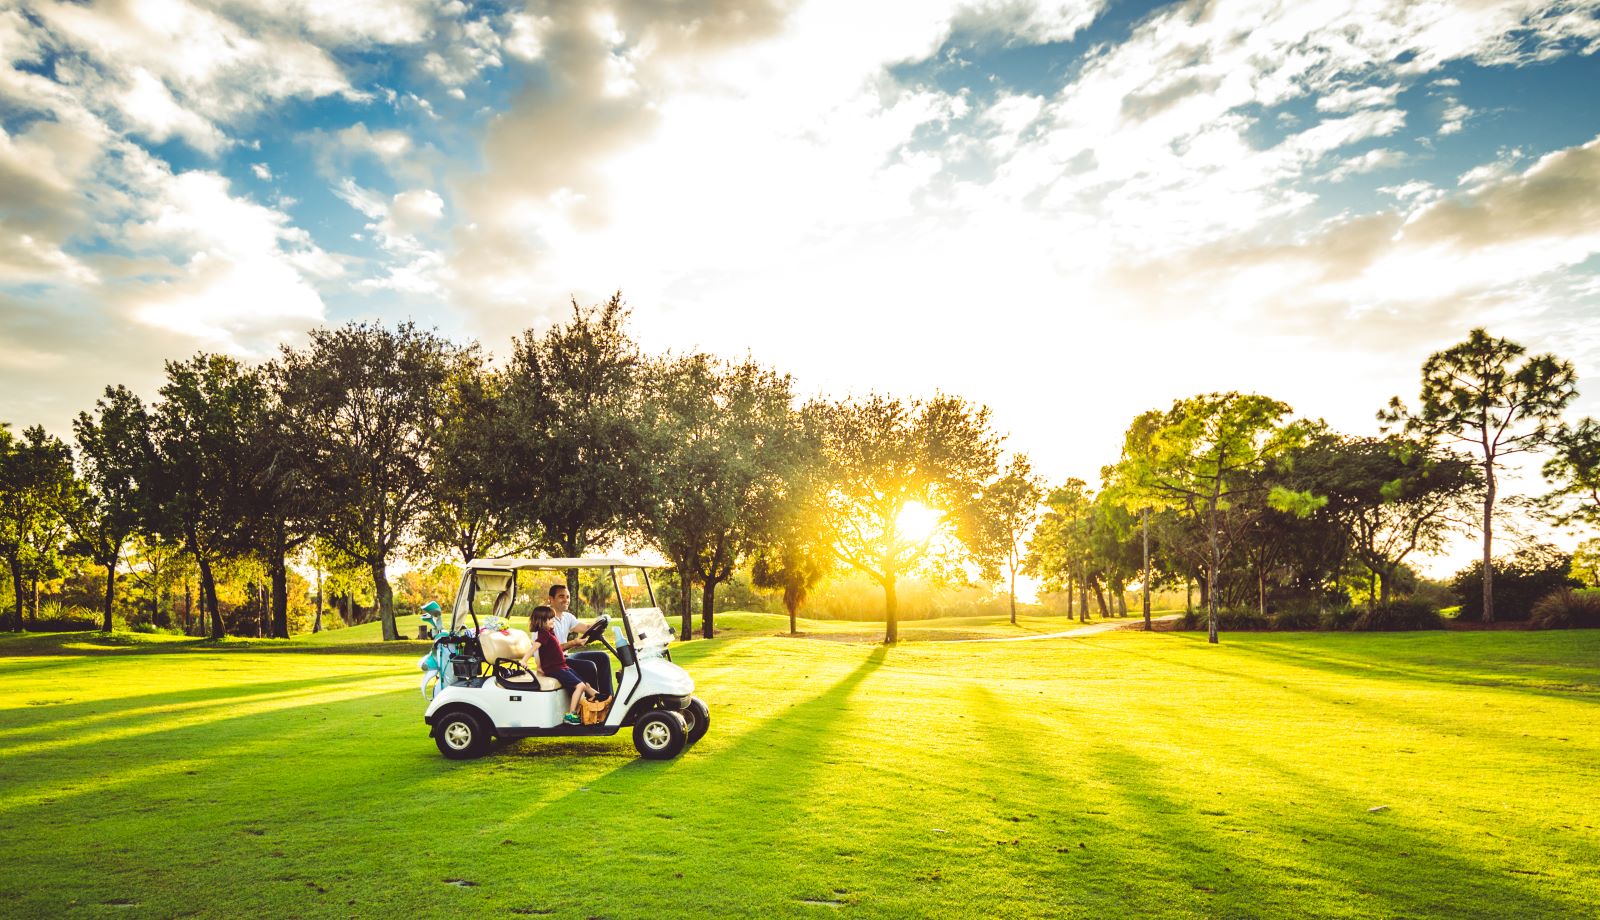 7 Simple Ways to Prevent Golf Cart Injuries